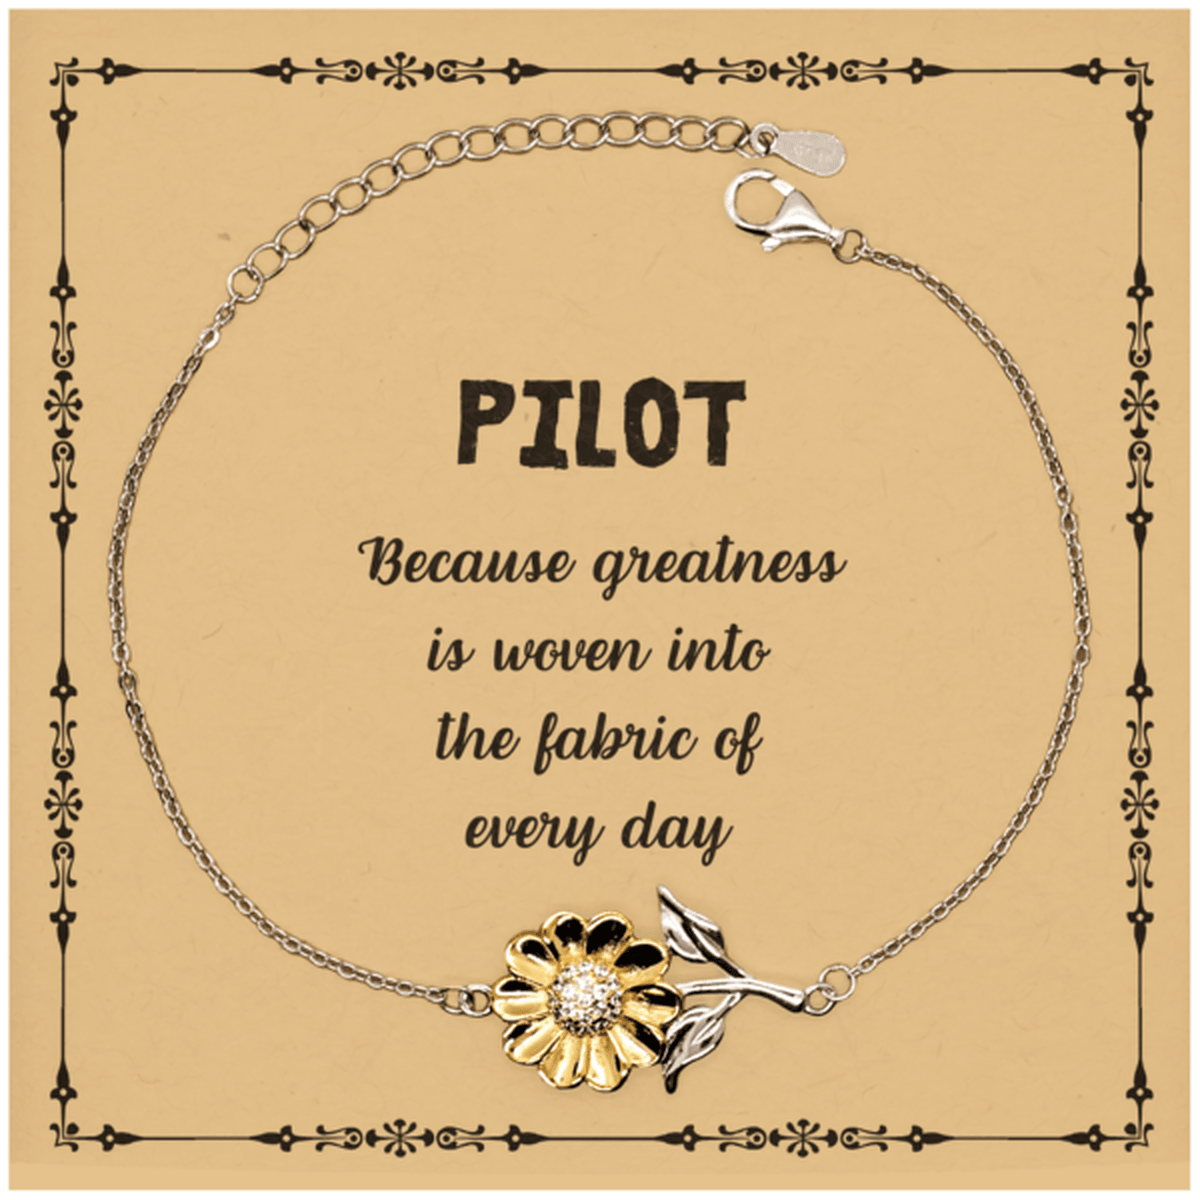 Sarcastic Pilot Sunflower Bracelet Gifts, Christmas Holiday Gifts for Pilot Birthday Message Card, Pilot: Because greatness is woven into the fabric of every day, Coworkers, Friends - Mallard Moon Gift Shop